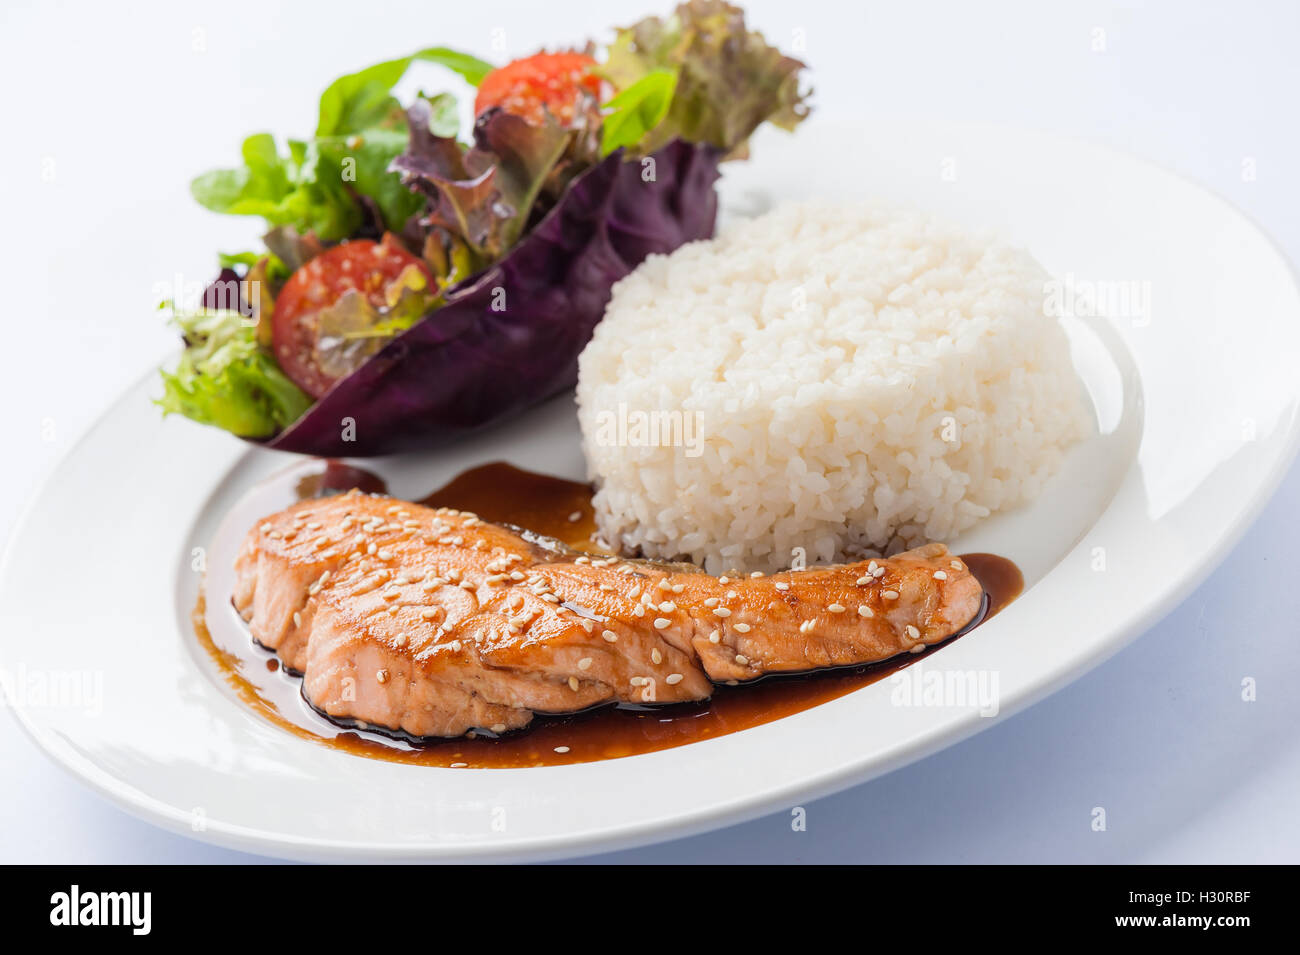 Fusion food style grilled salmon dressed with Japanese sweet sauce (Teriyaki) including Thai rice garnished with vegetables in c Stock Photo